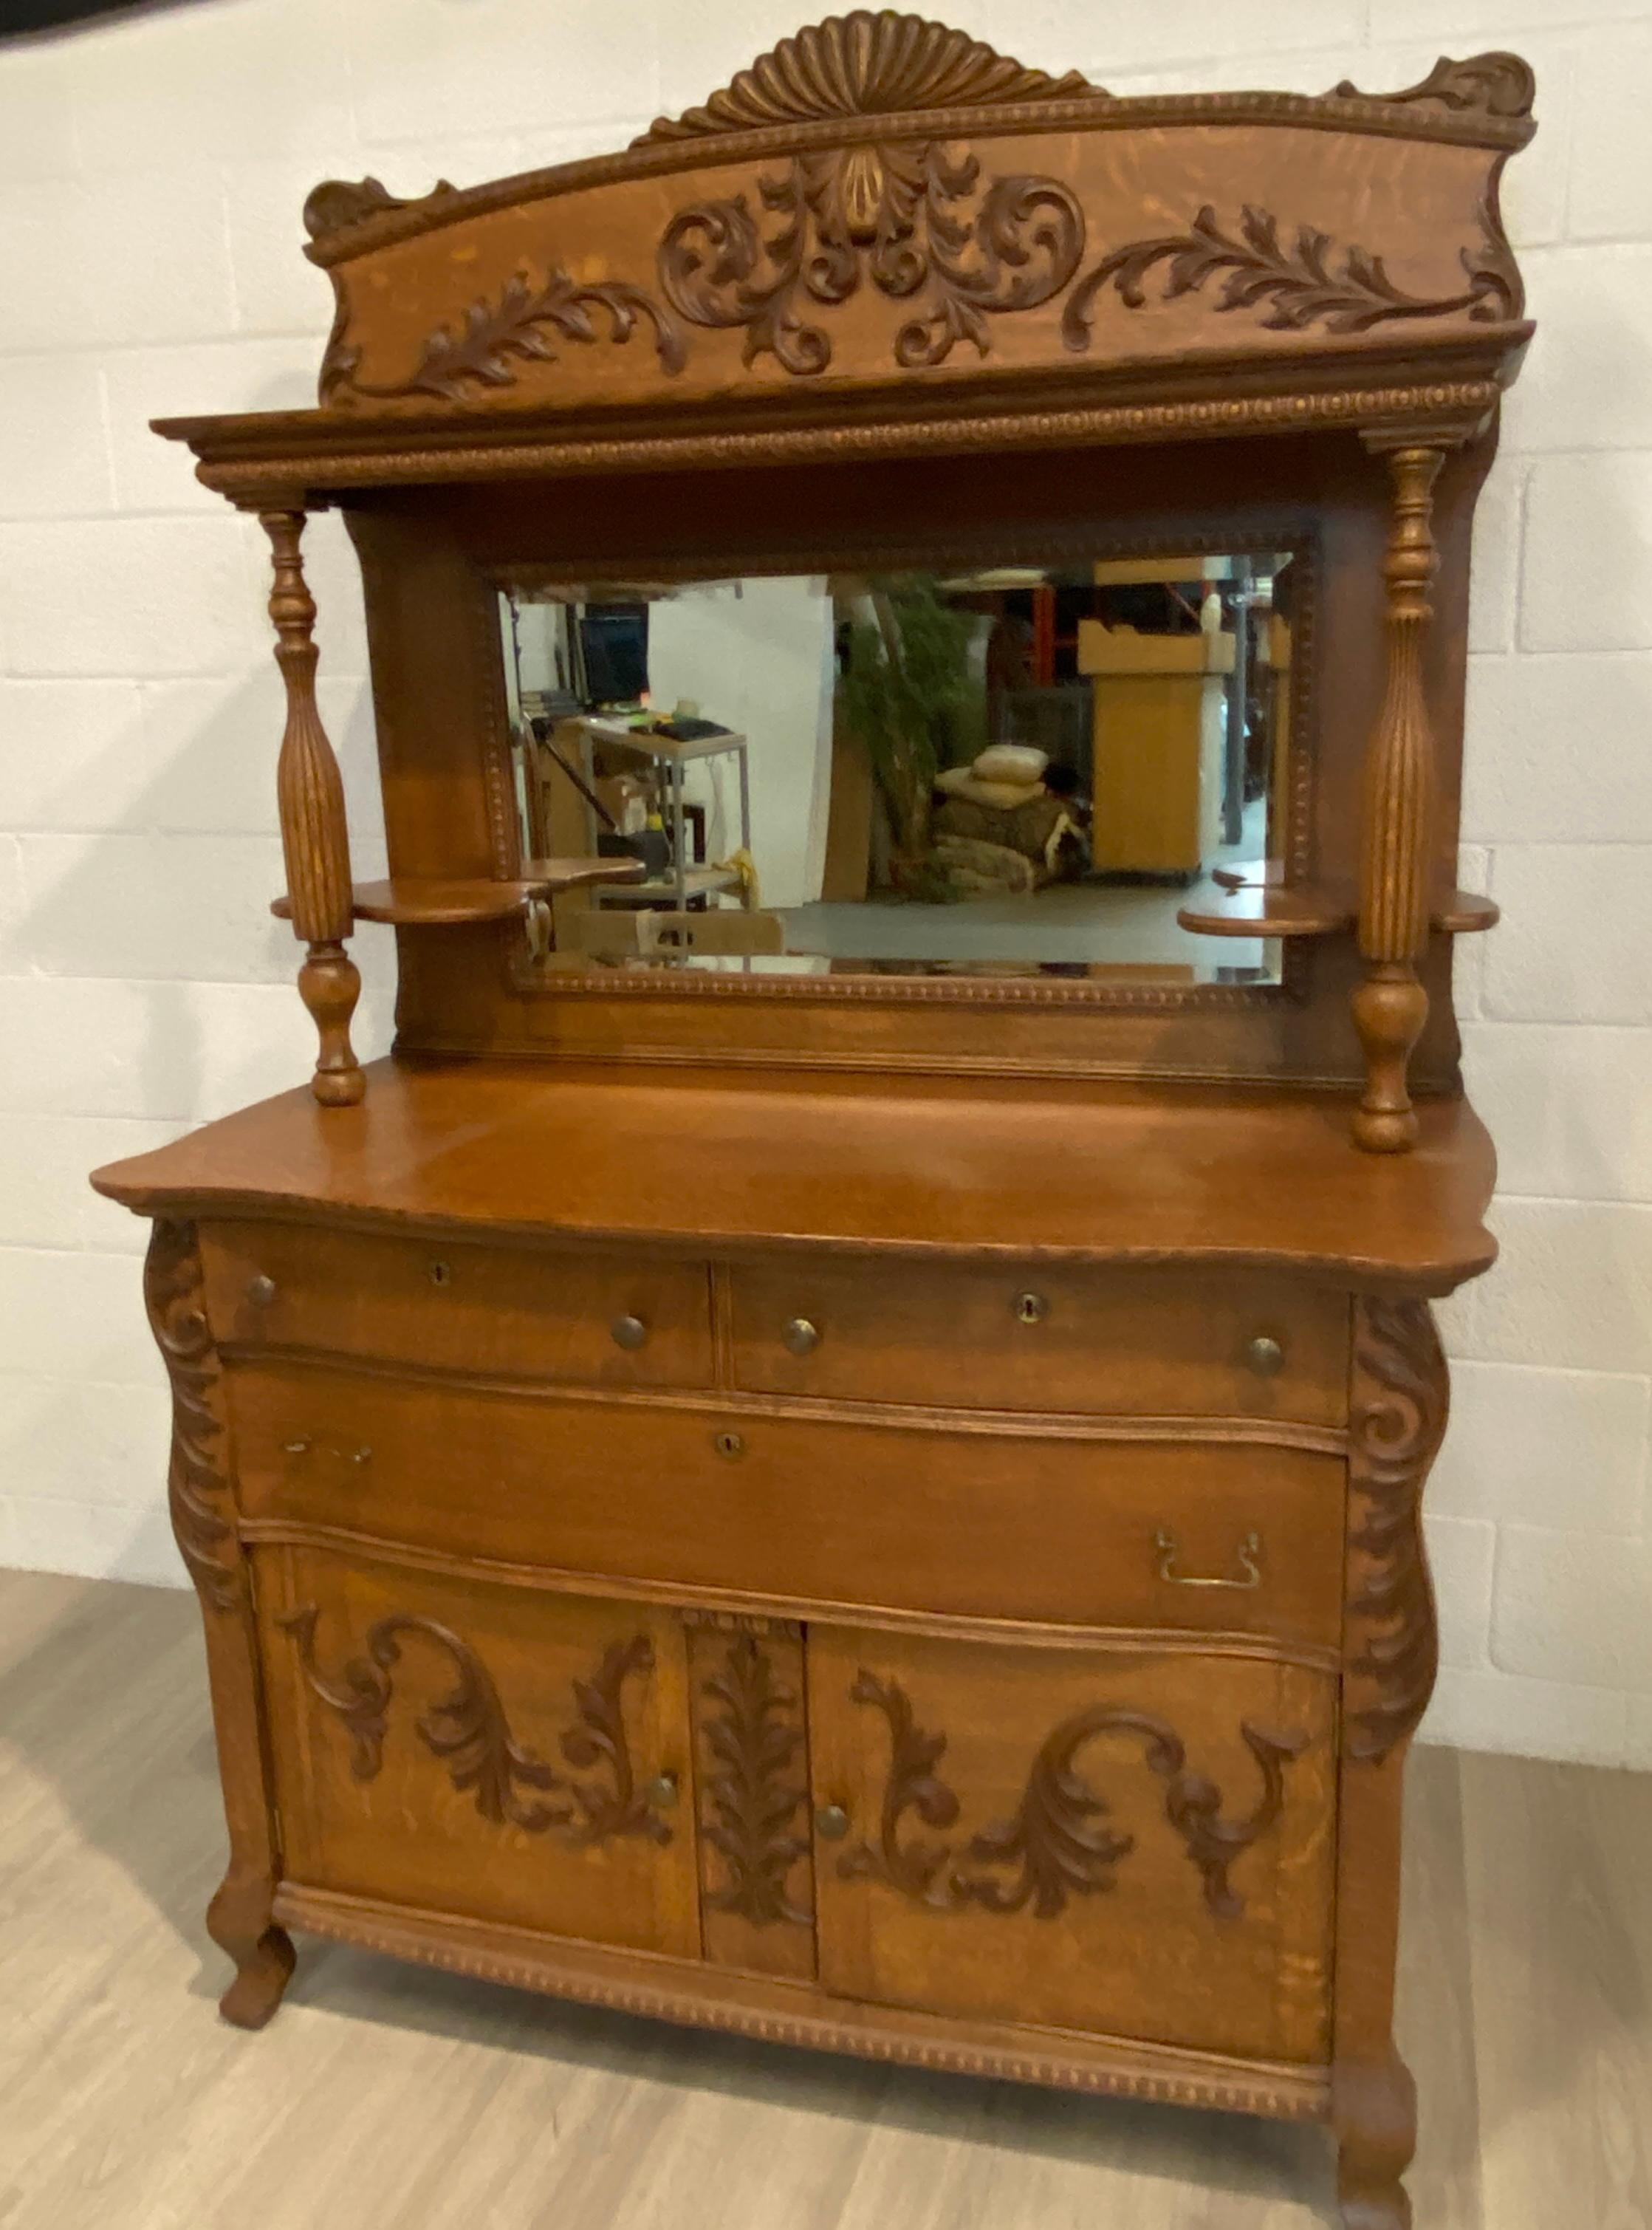 Offering here a sideboard with oak solids and quarter cut oak and a beveled glass mirror backing. The carvings are are relief carvings attached in the appropriate scale to enhance the strong character of the oak sideboard.  This sideboard has been